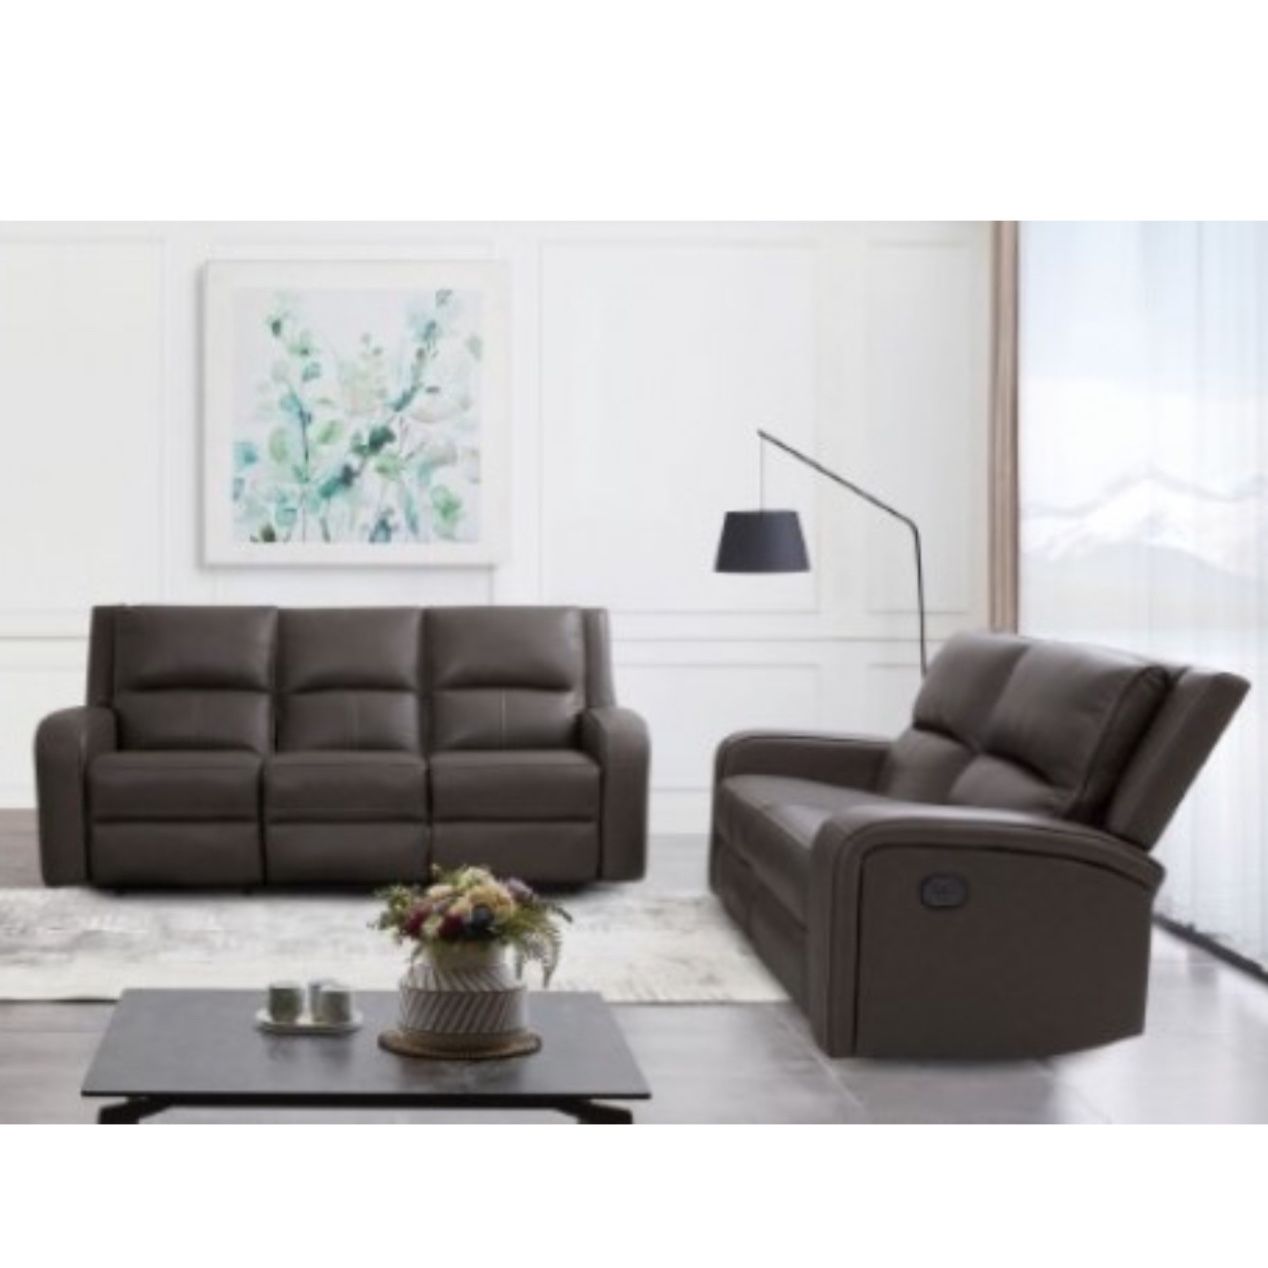 POWERED SOFA & LOVESEAT (FREE DELIVERY)